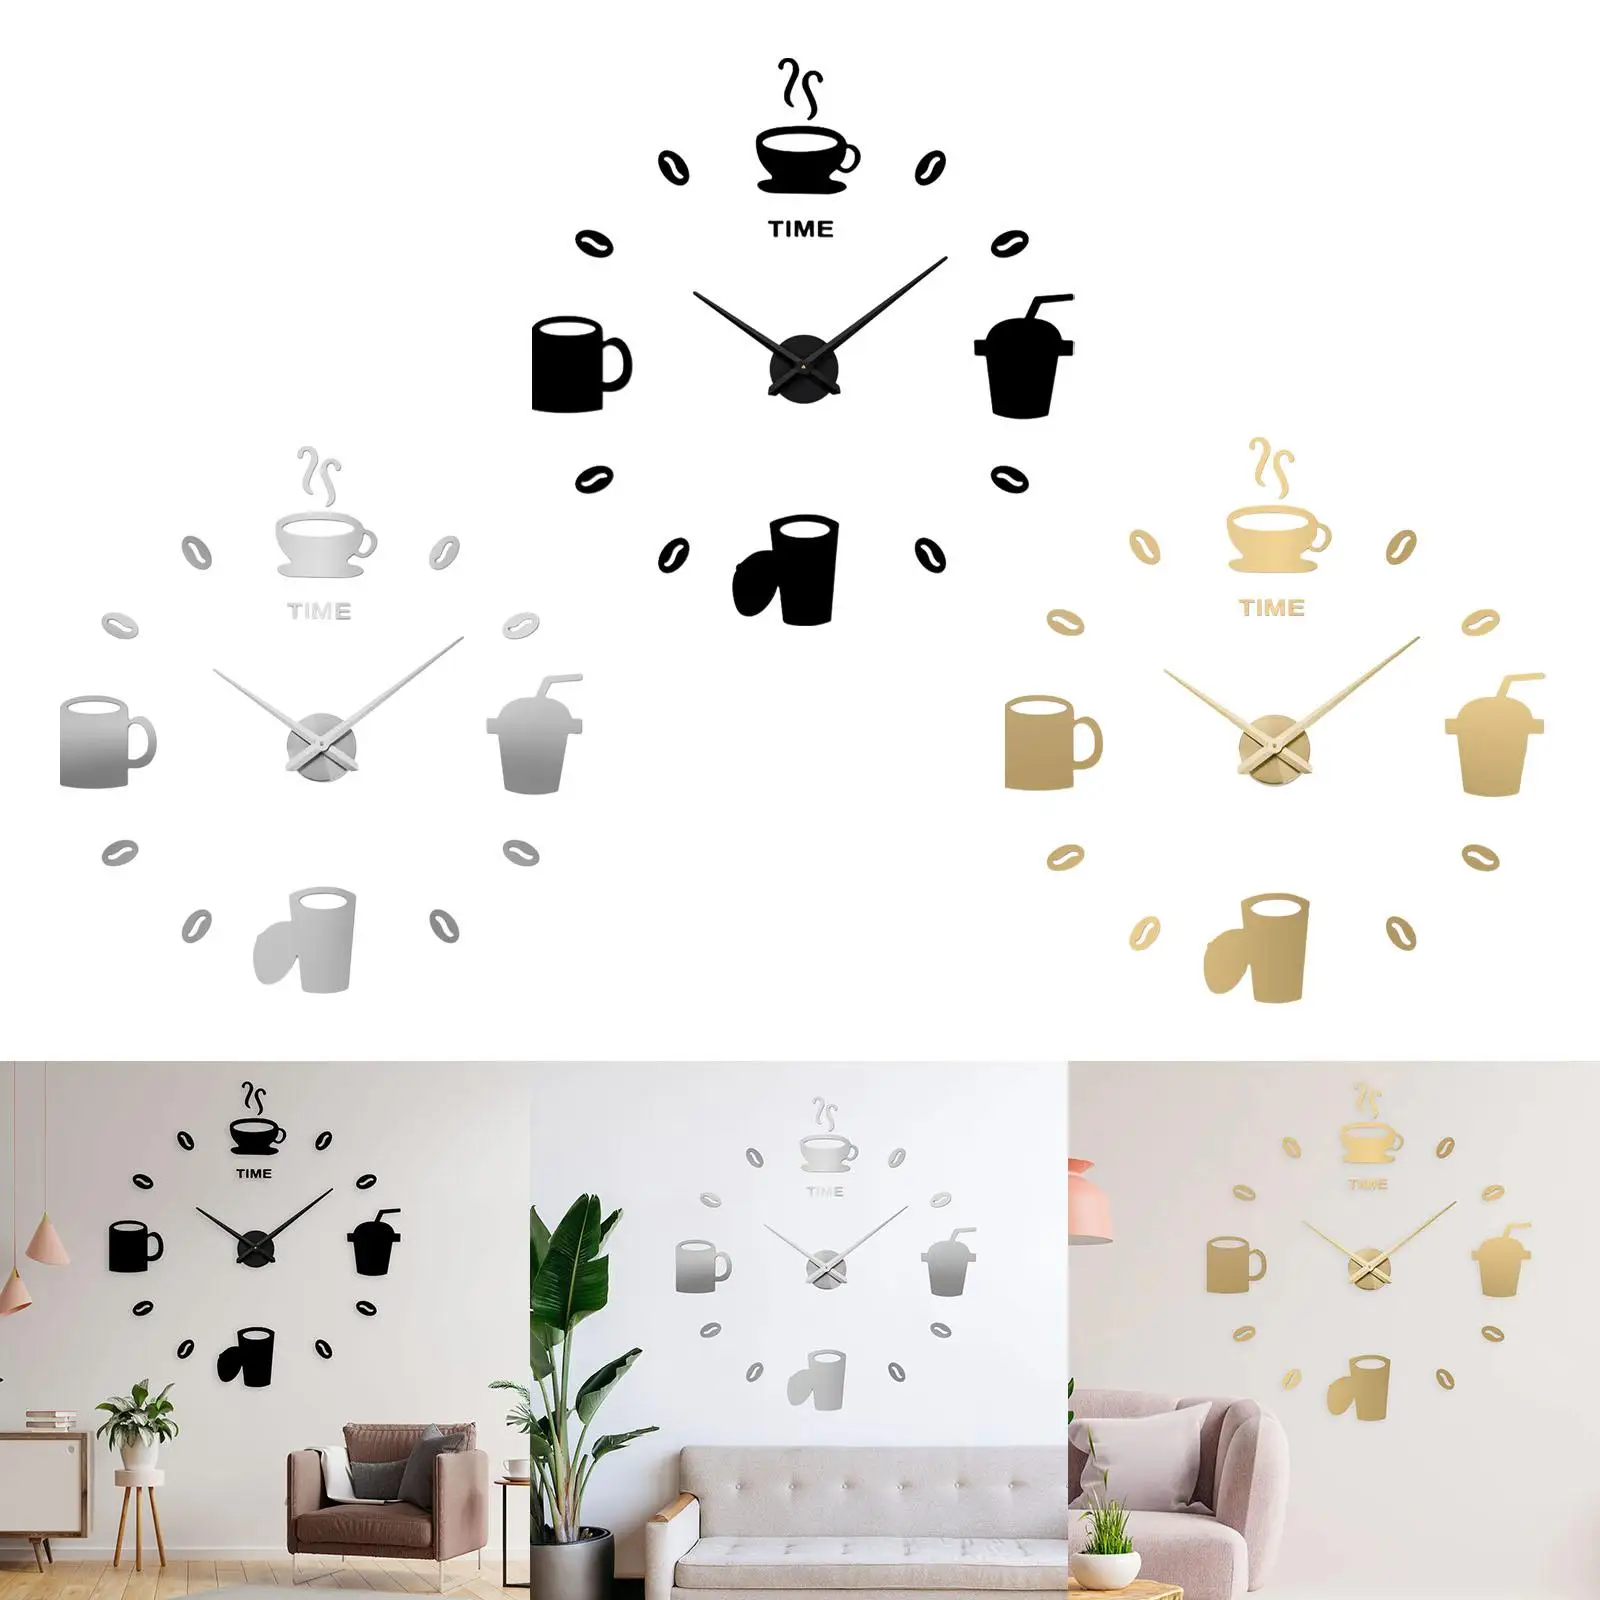 47 inch DIY Wall Clock Stickers Round Decorative Clock for Living Room Home Decor